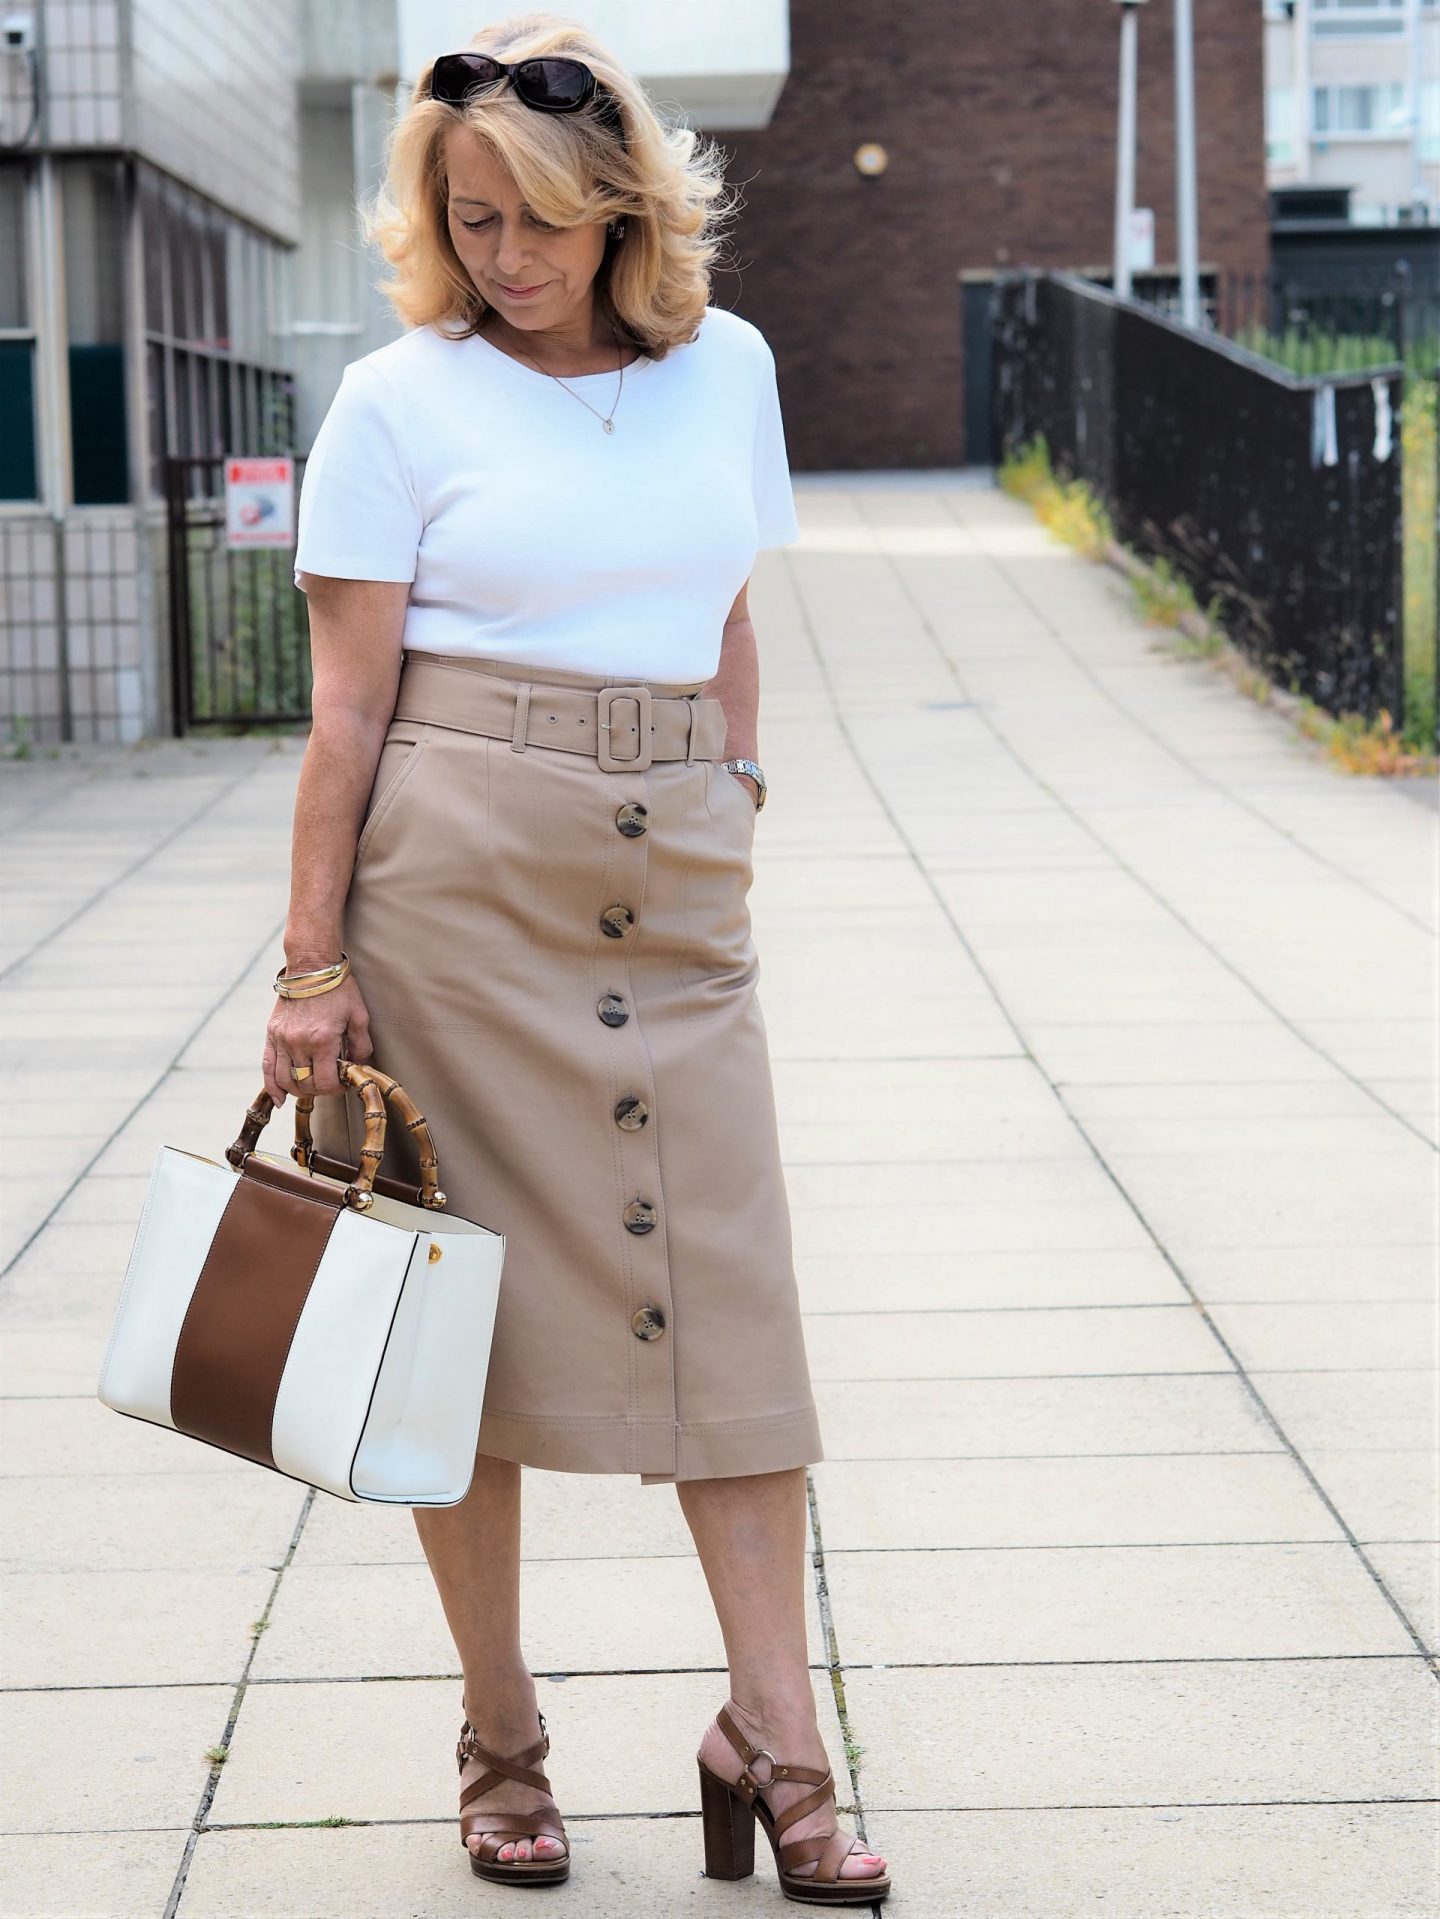 today I'm sharing this safari-style skirt instead.